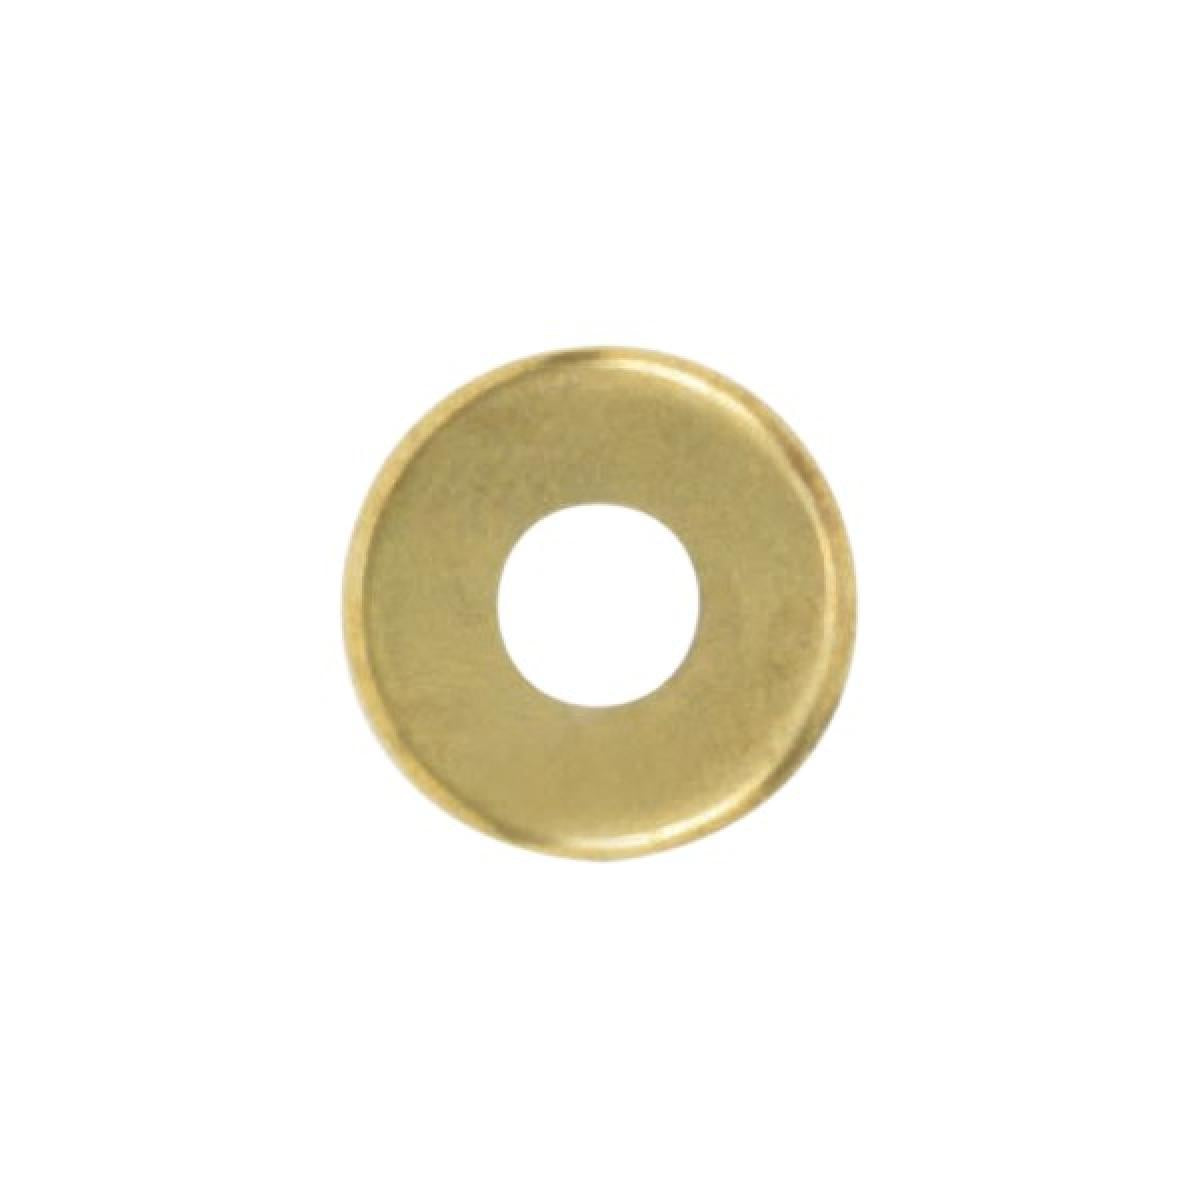 Satco 90-2141 Turned Brass Check Ring 1/8 IP Slip Burnished And Lacquered 3/4" Diameter